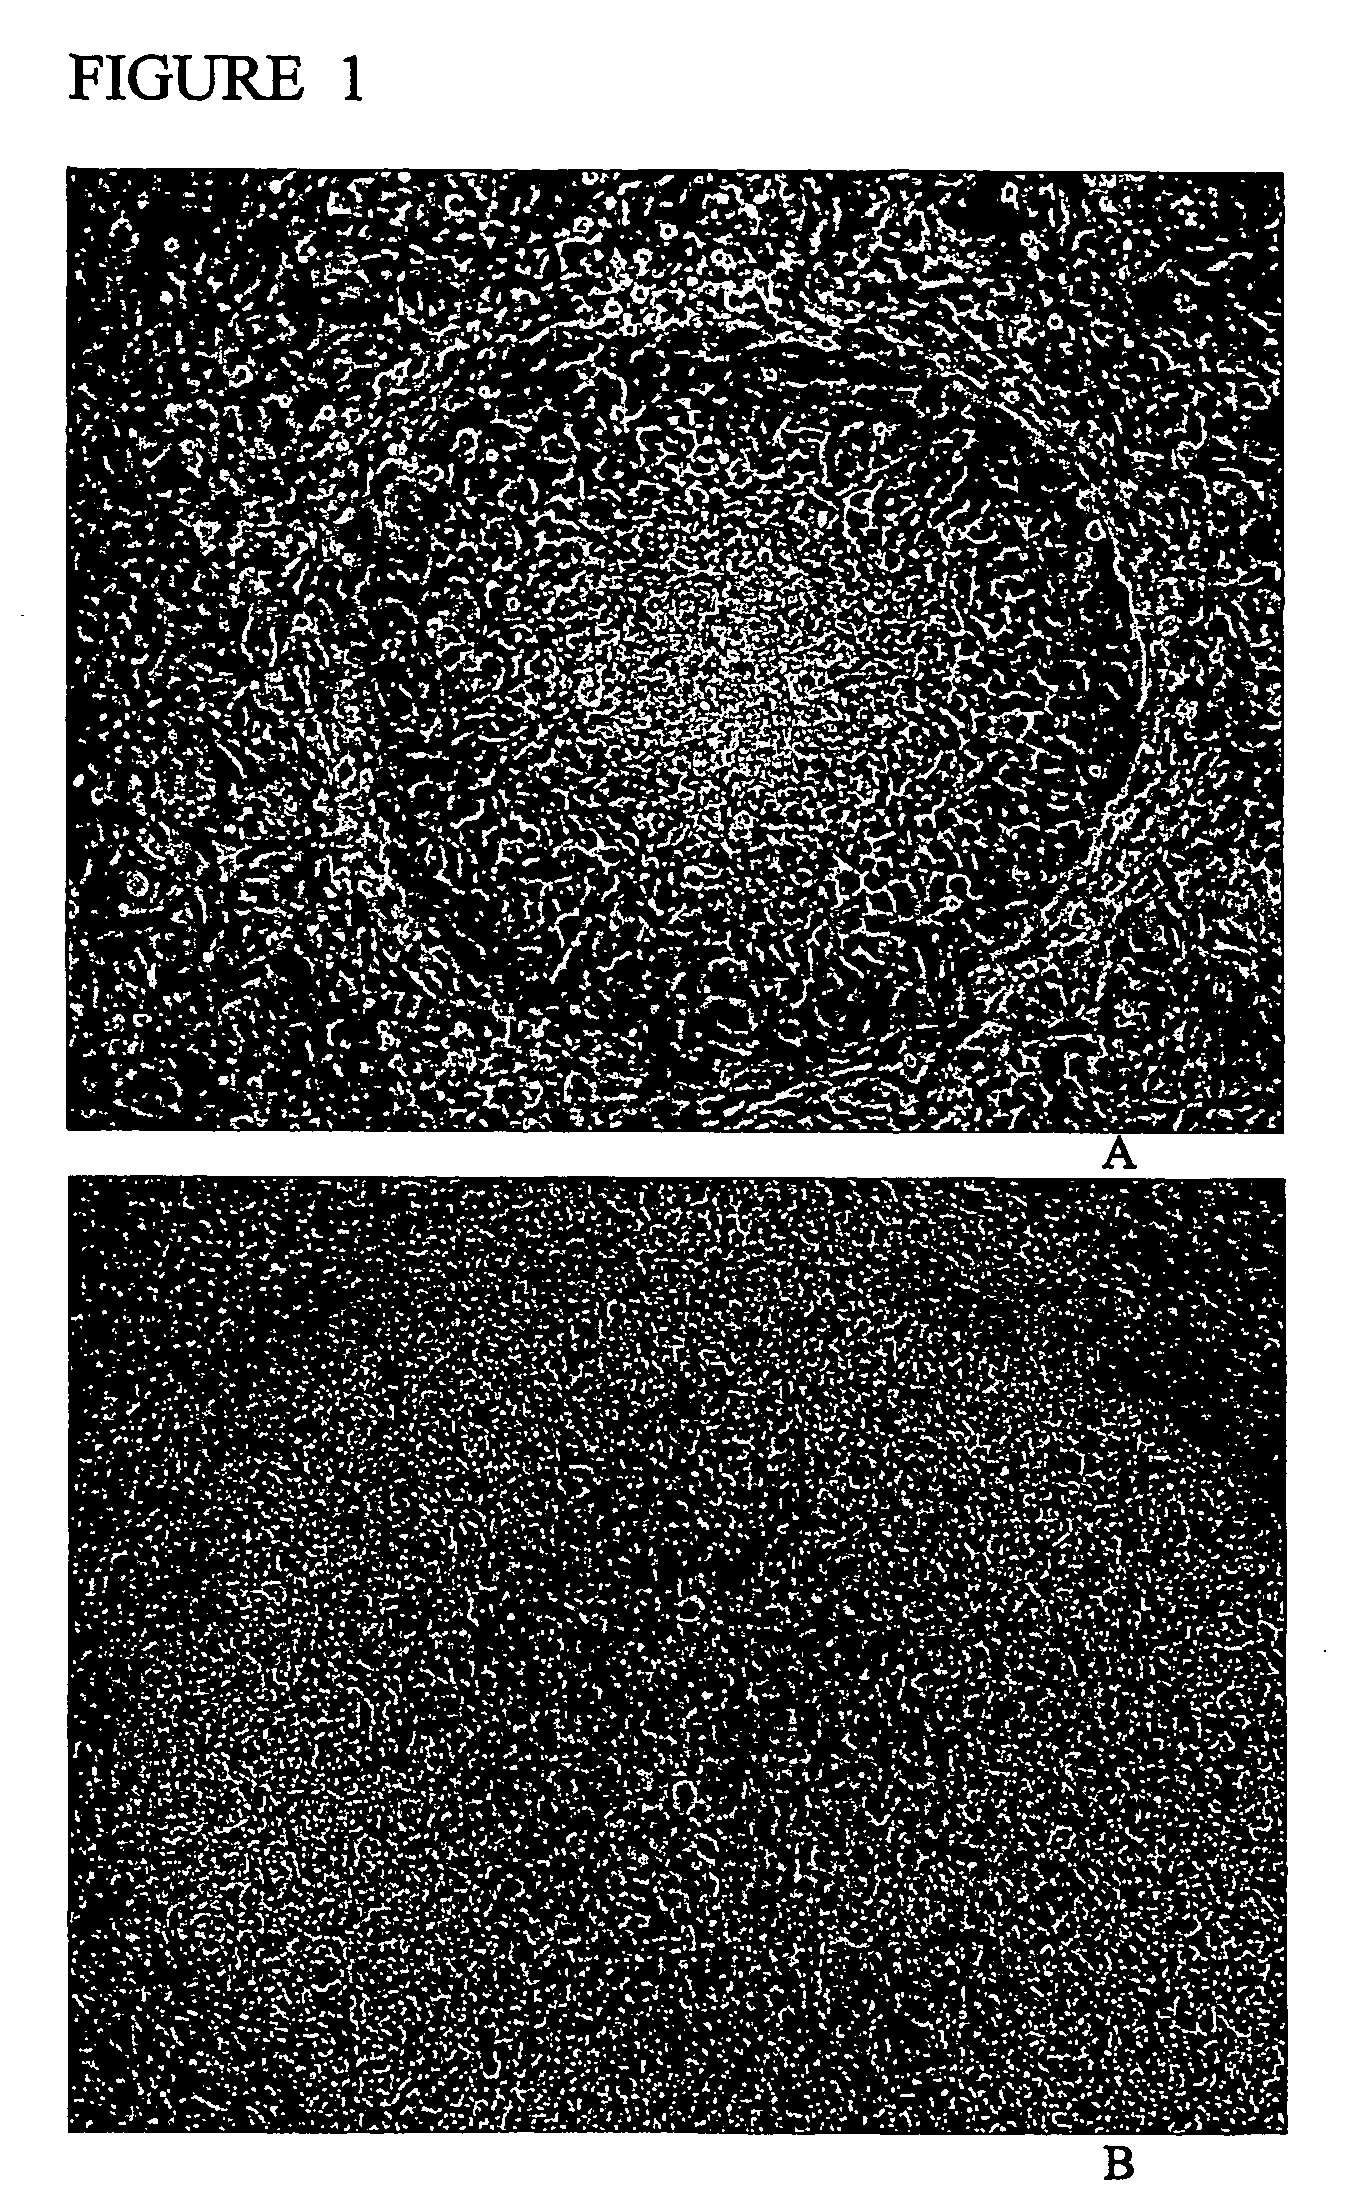 Alternative compositions and methods for the culture of stem cells